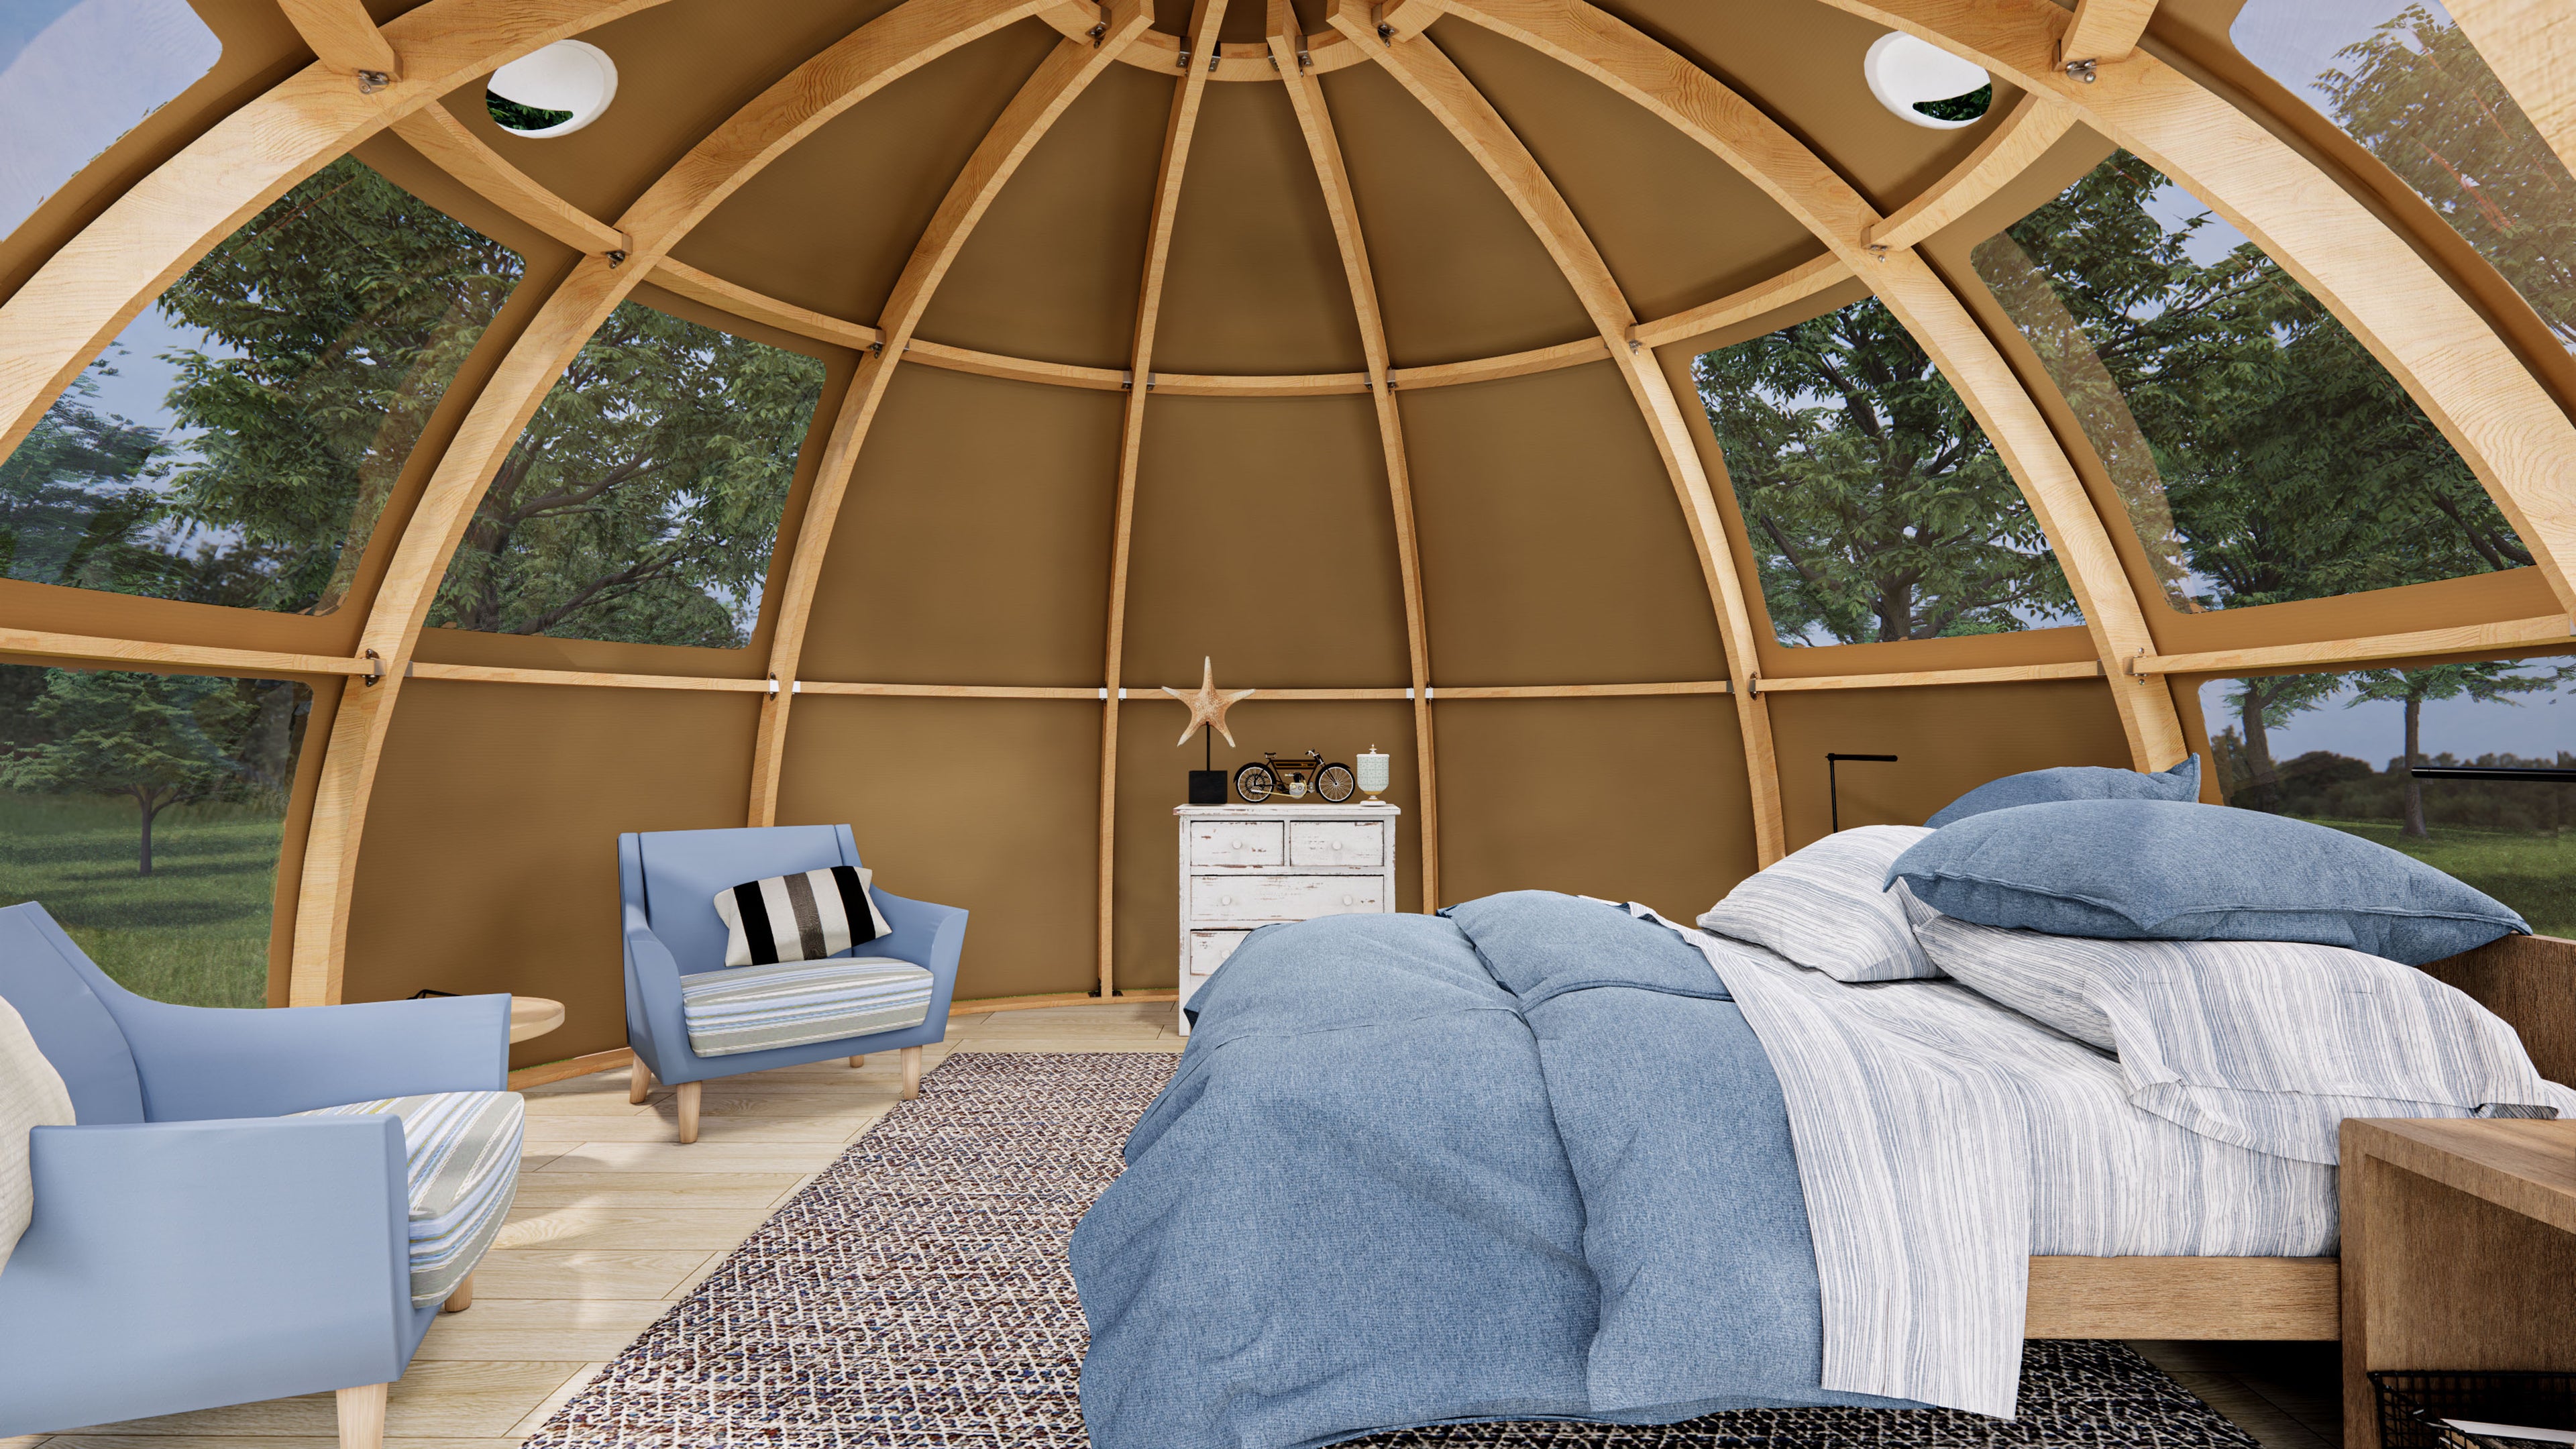 Artemis Dome: Unique and stylish space for glamping, guest house, ADU, studio, work space, alternative house ,Airbnb and more